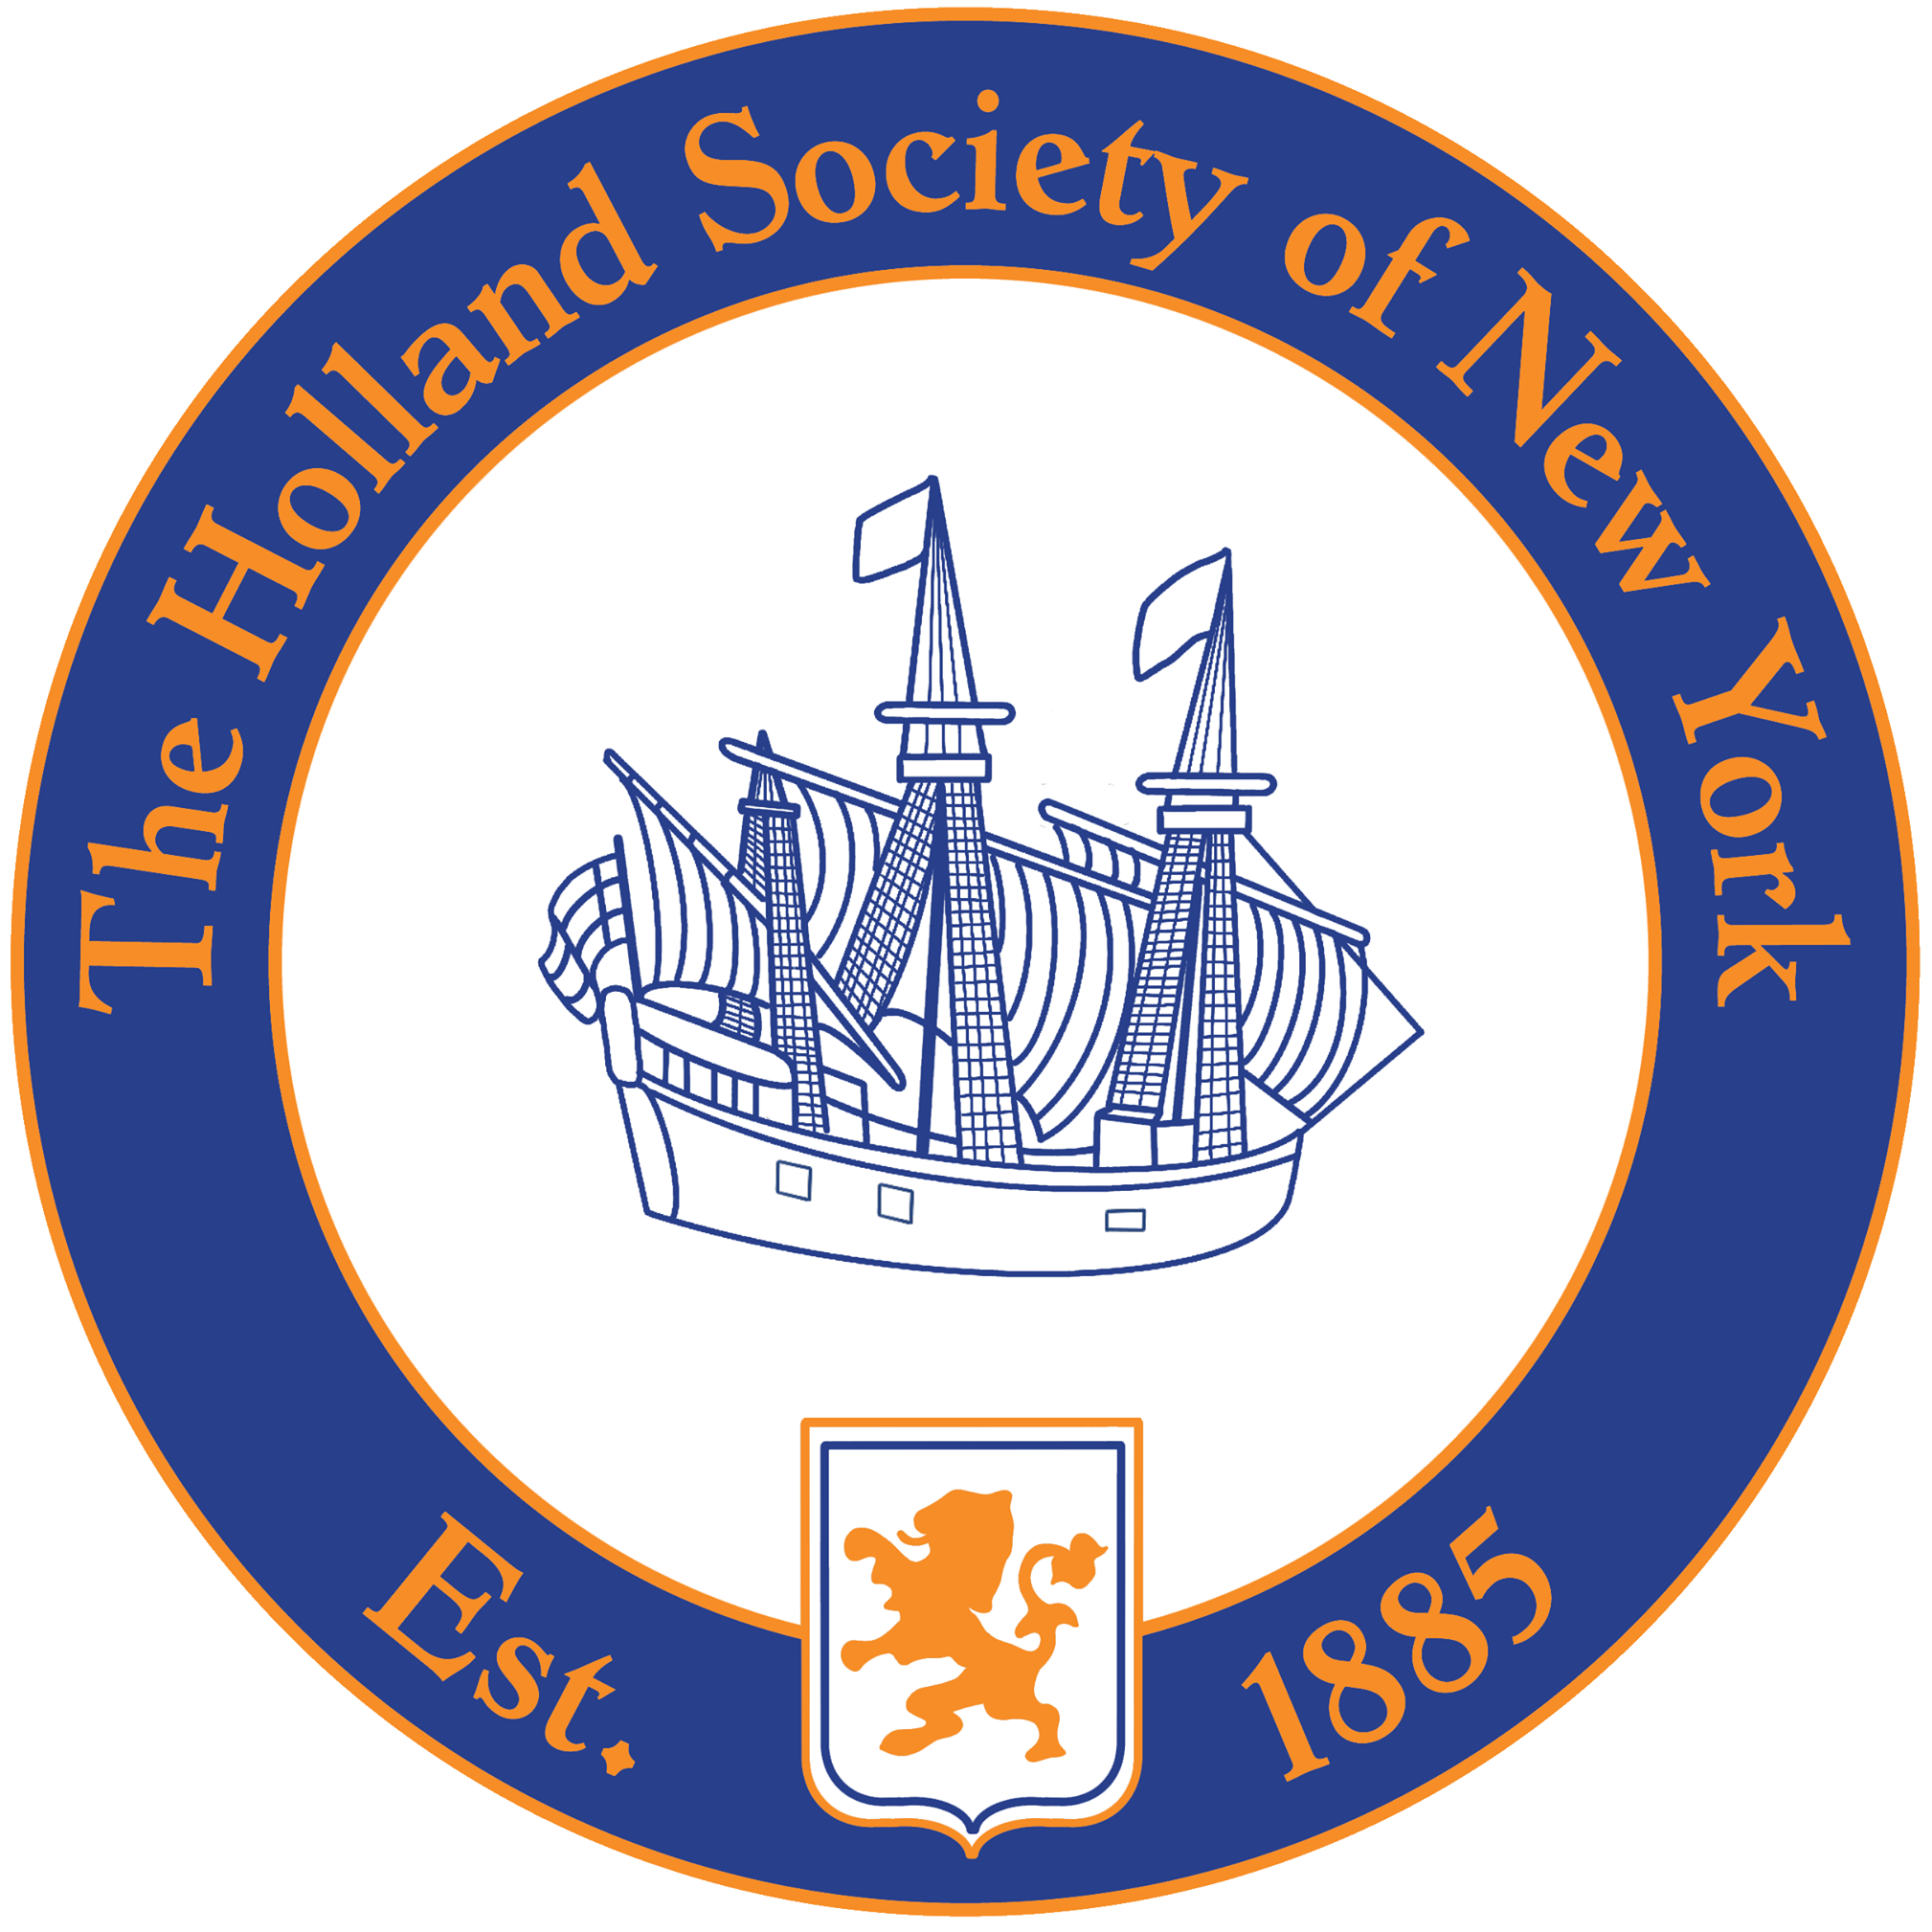 Dutch Speaking Organization in USA - The Holland Society of New York